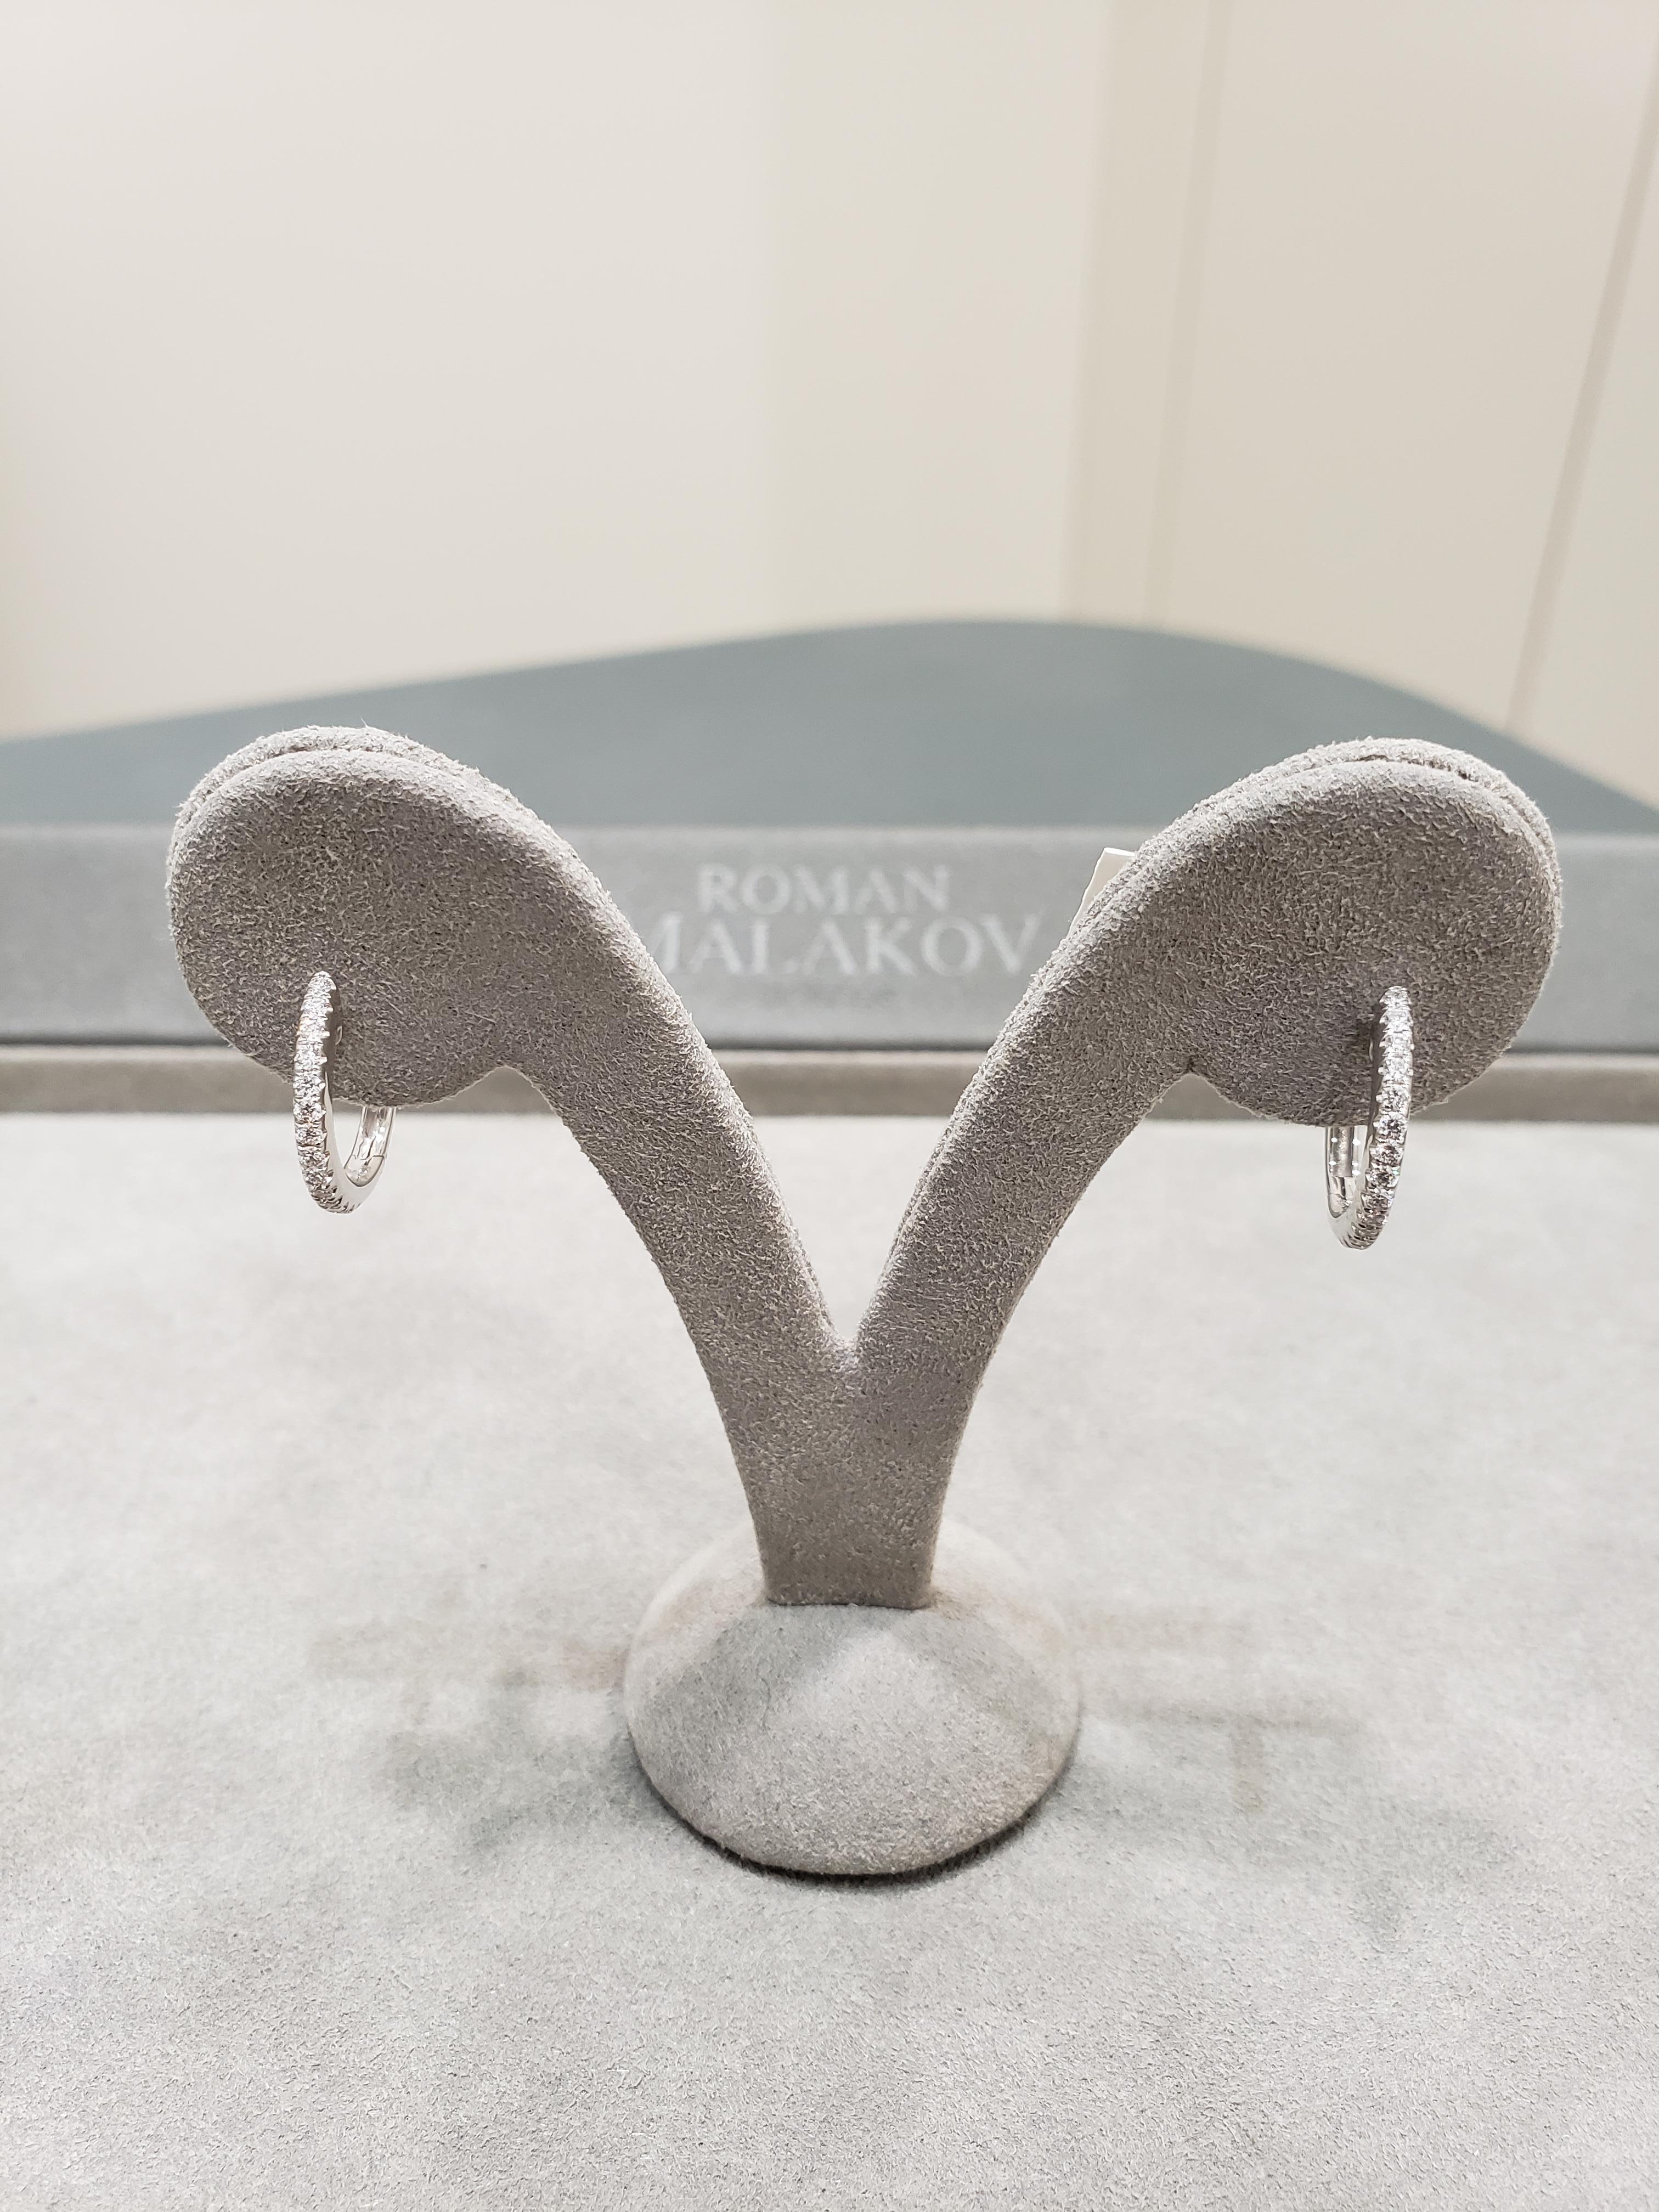 A simple pair of hoop earrings set with round brilliant diamonds in 14 karat white gold. Diamonds weigh 0.29 carats total.

Style available in different price ranges. Prices are based on your selection of the 4C’s (Carat, Color, Clarity, Cut).